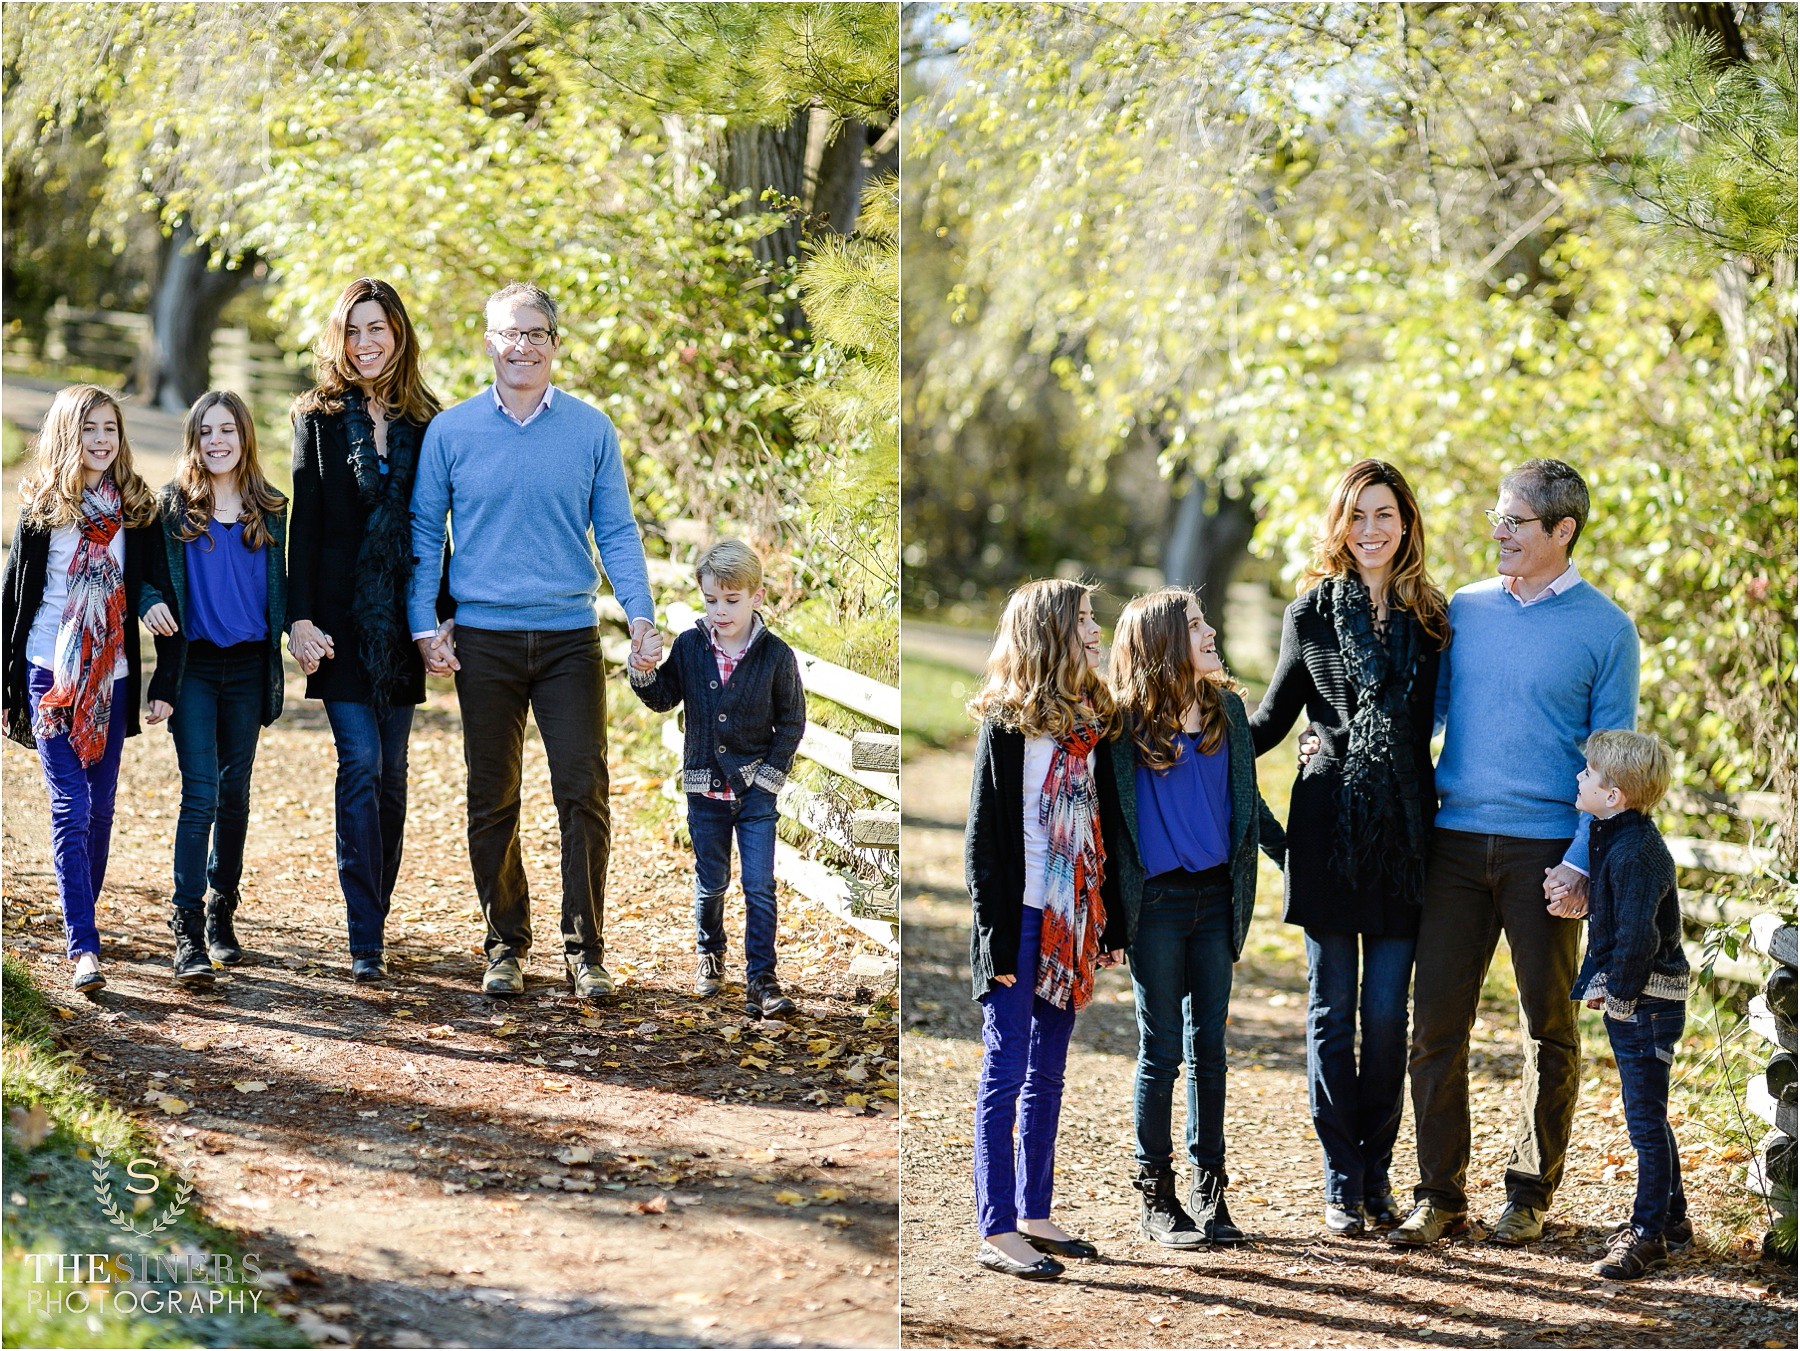 Fraser Family_Indianapolis Family Photographer_TheSinersPhotography_0012